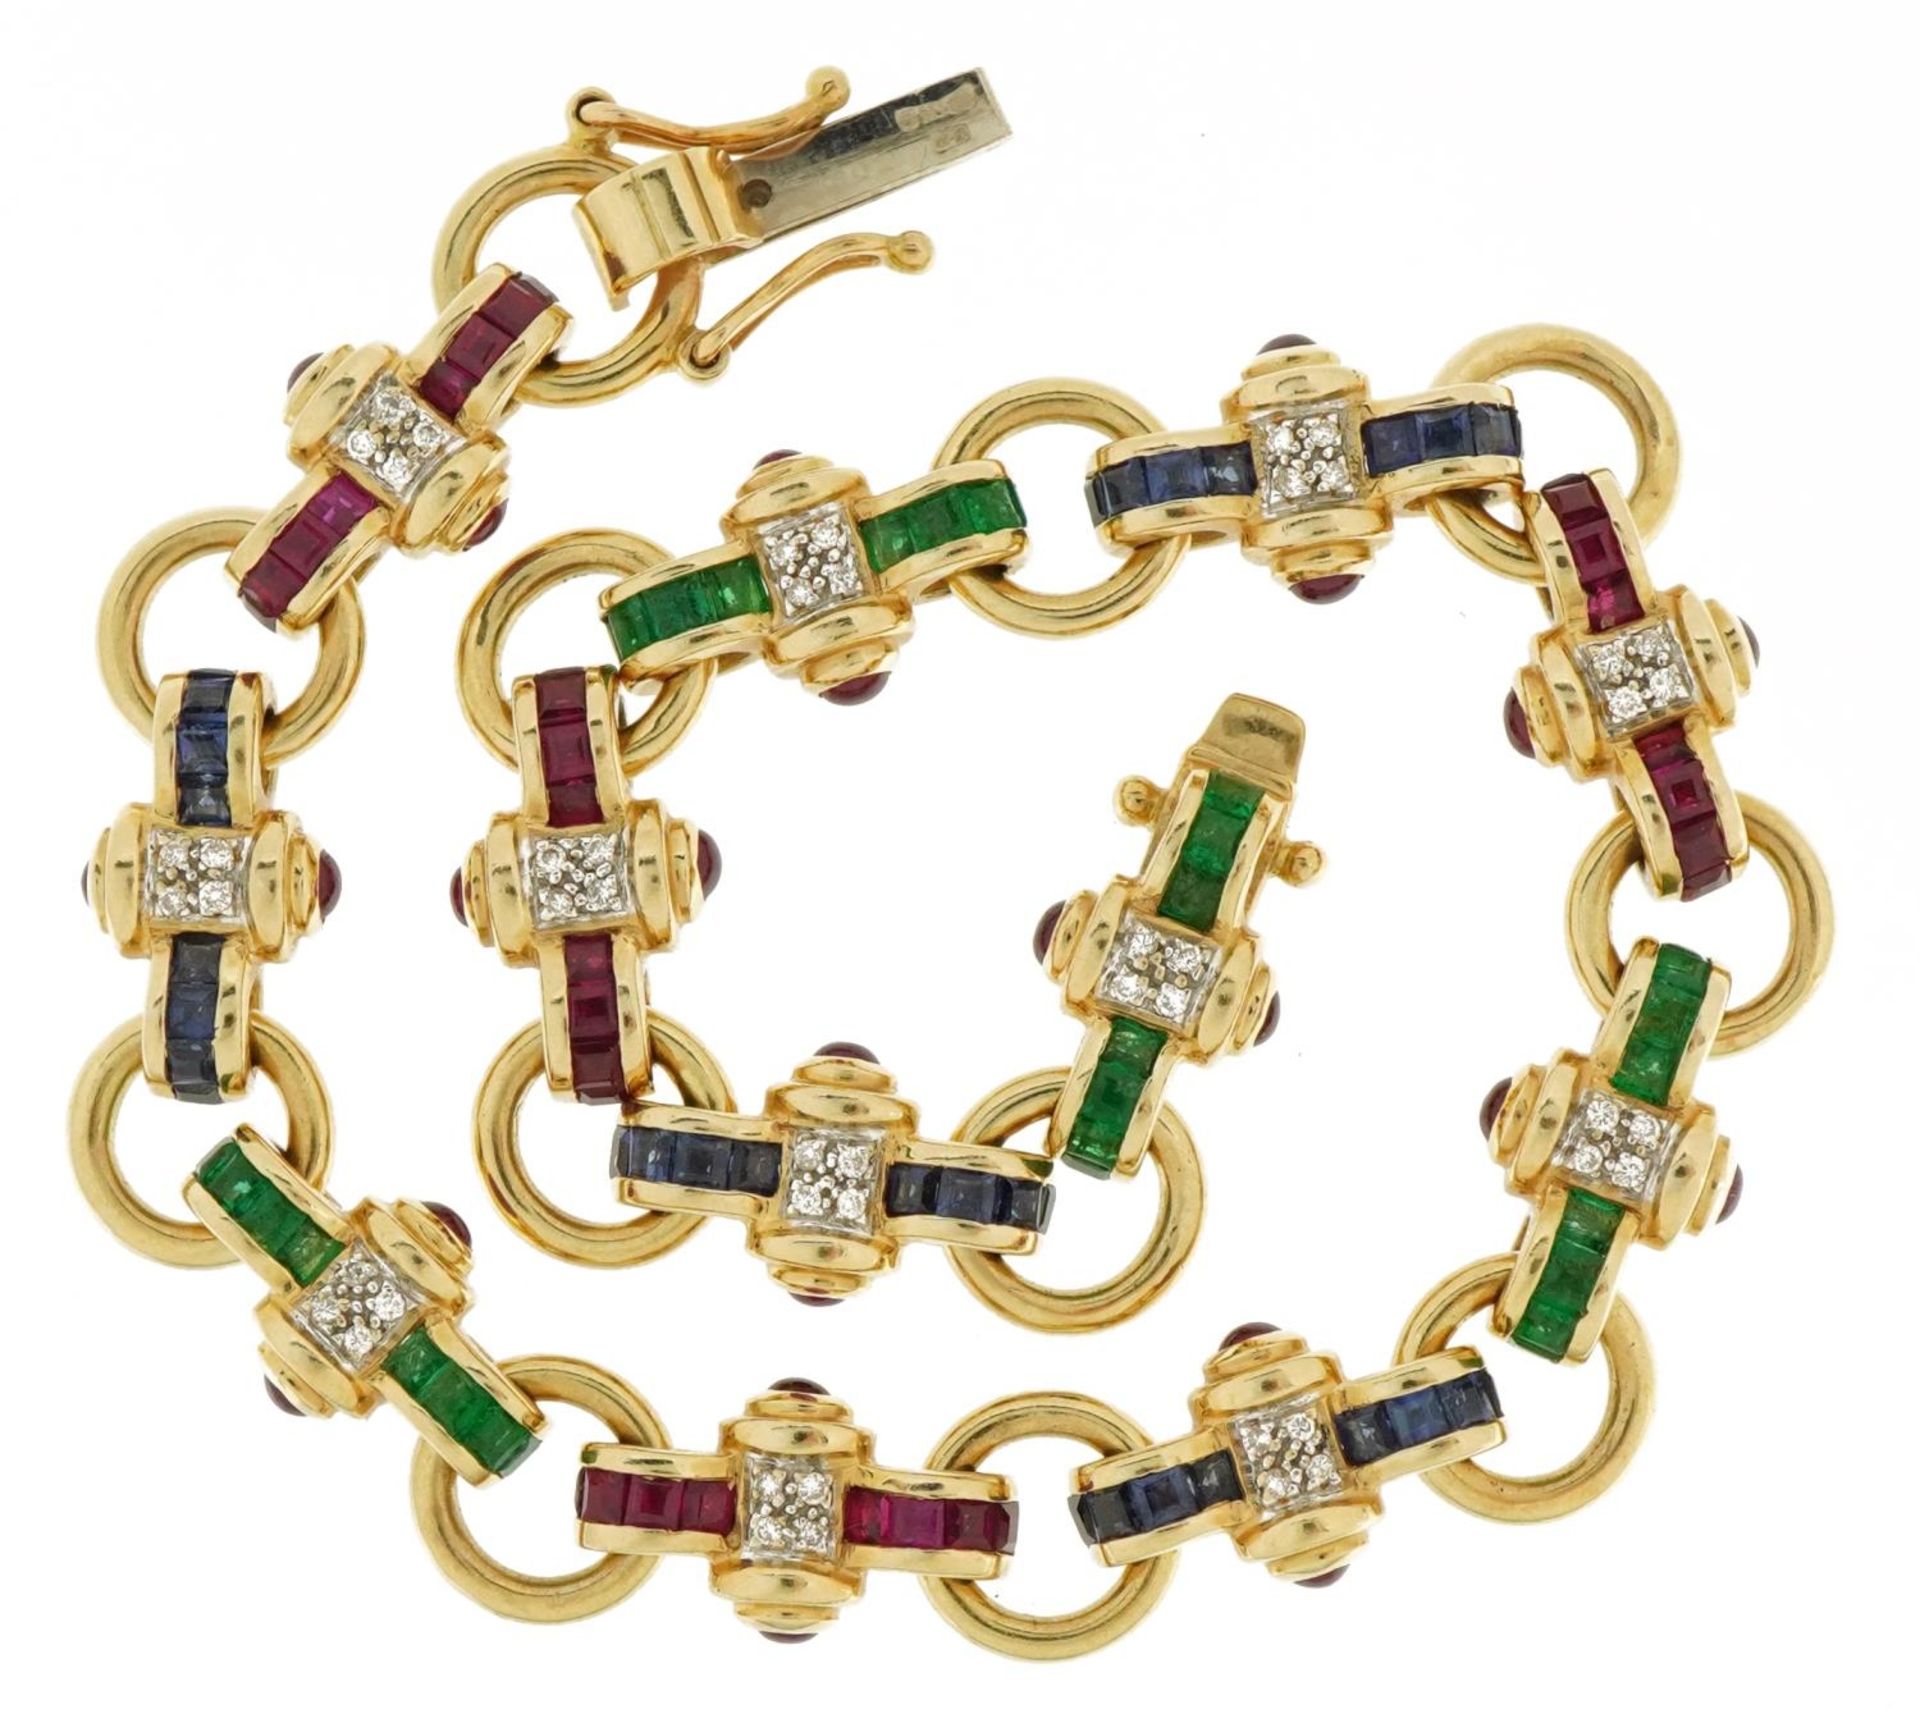 Franklin Mint, 14k gold tri-colour bracelet set with thirty two sapphires, thirty two emeralds, - Image 2 of 4